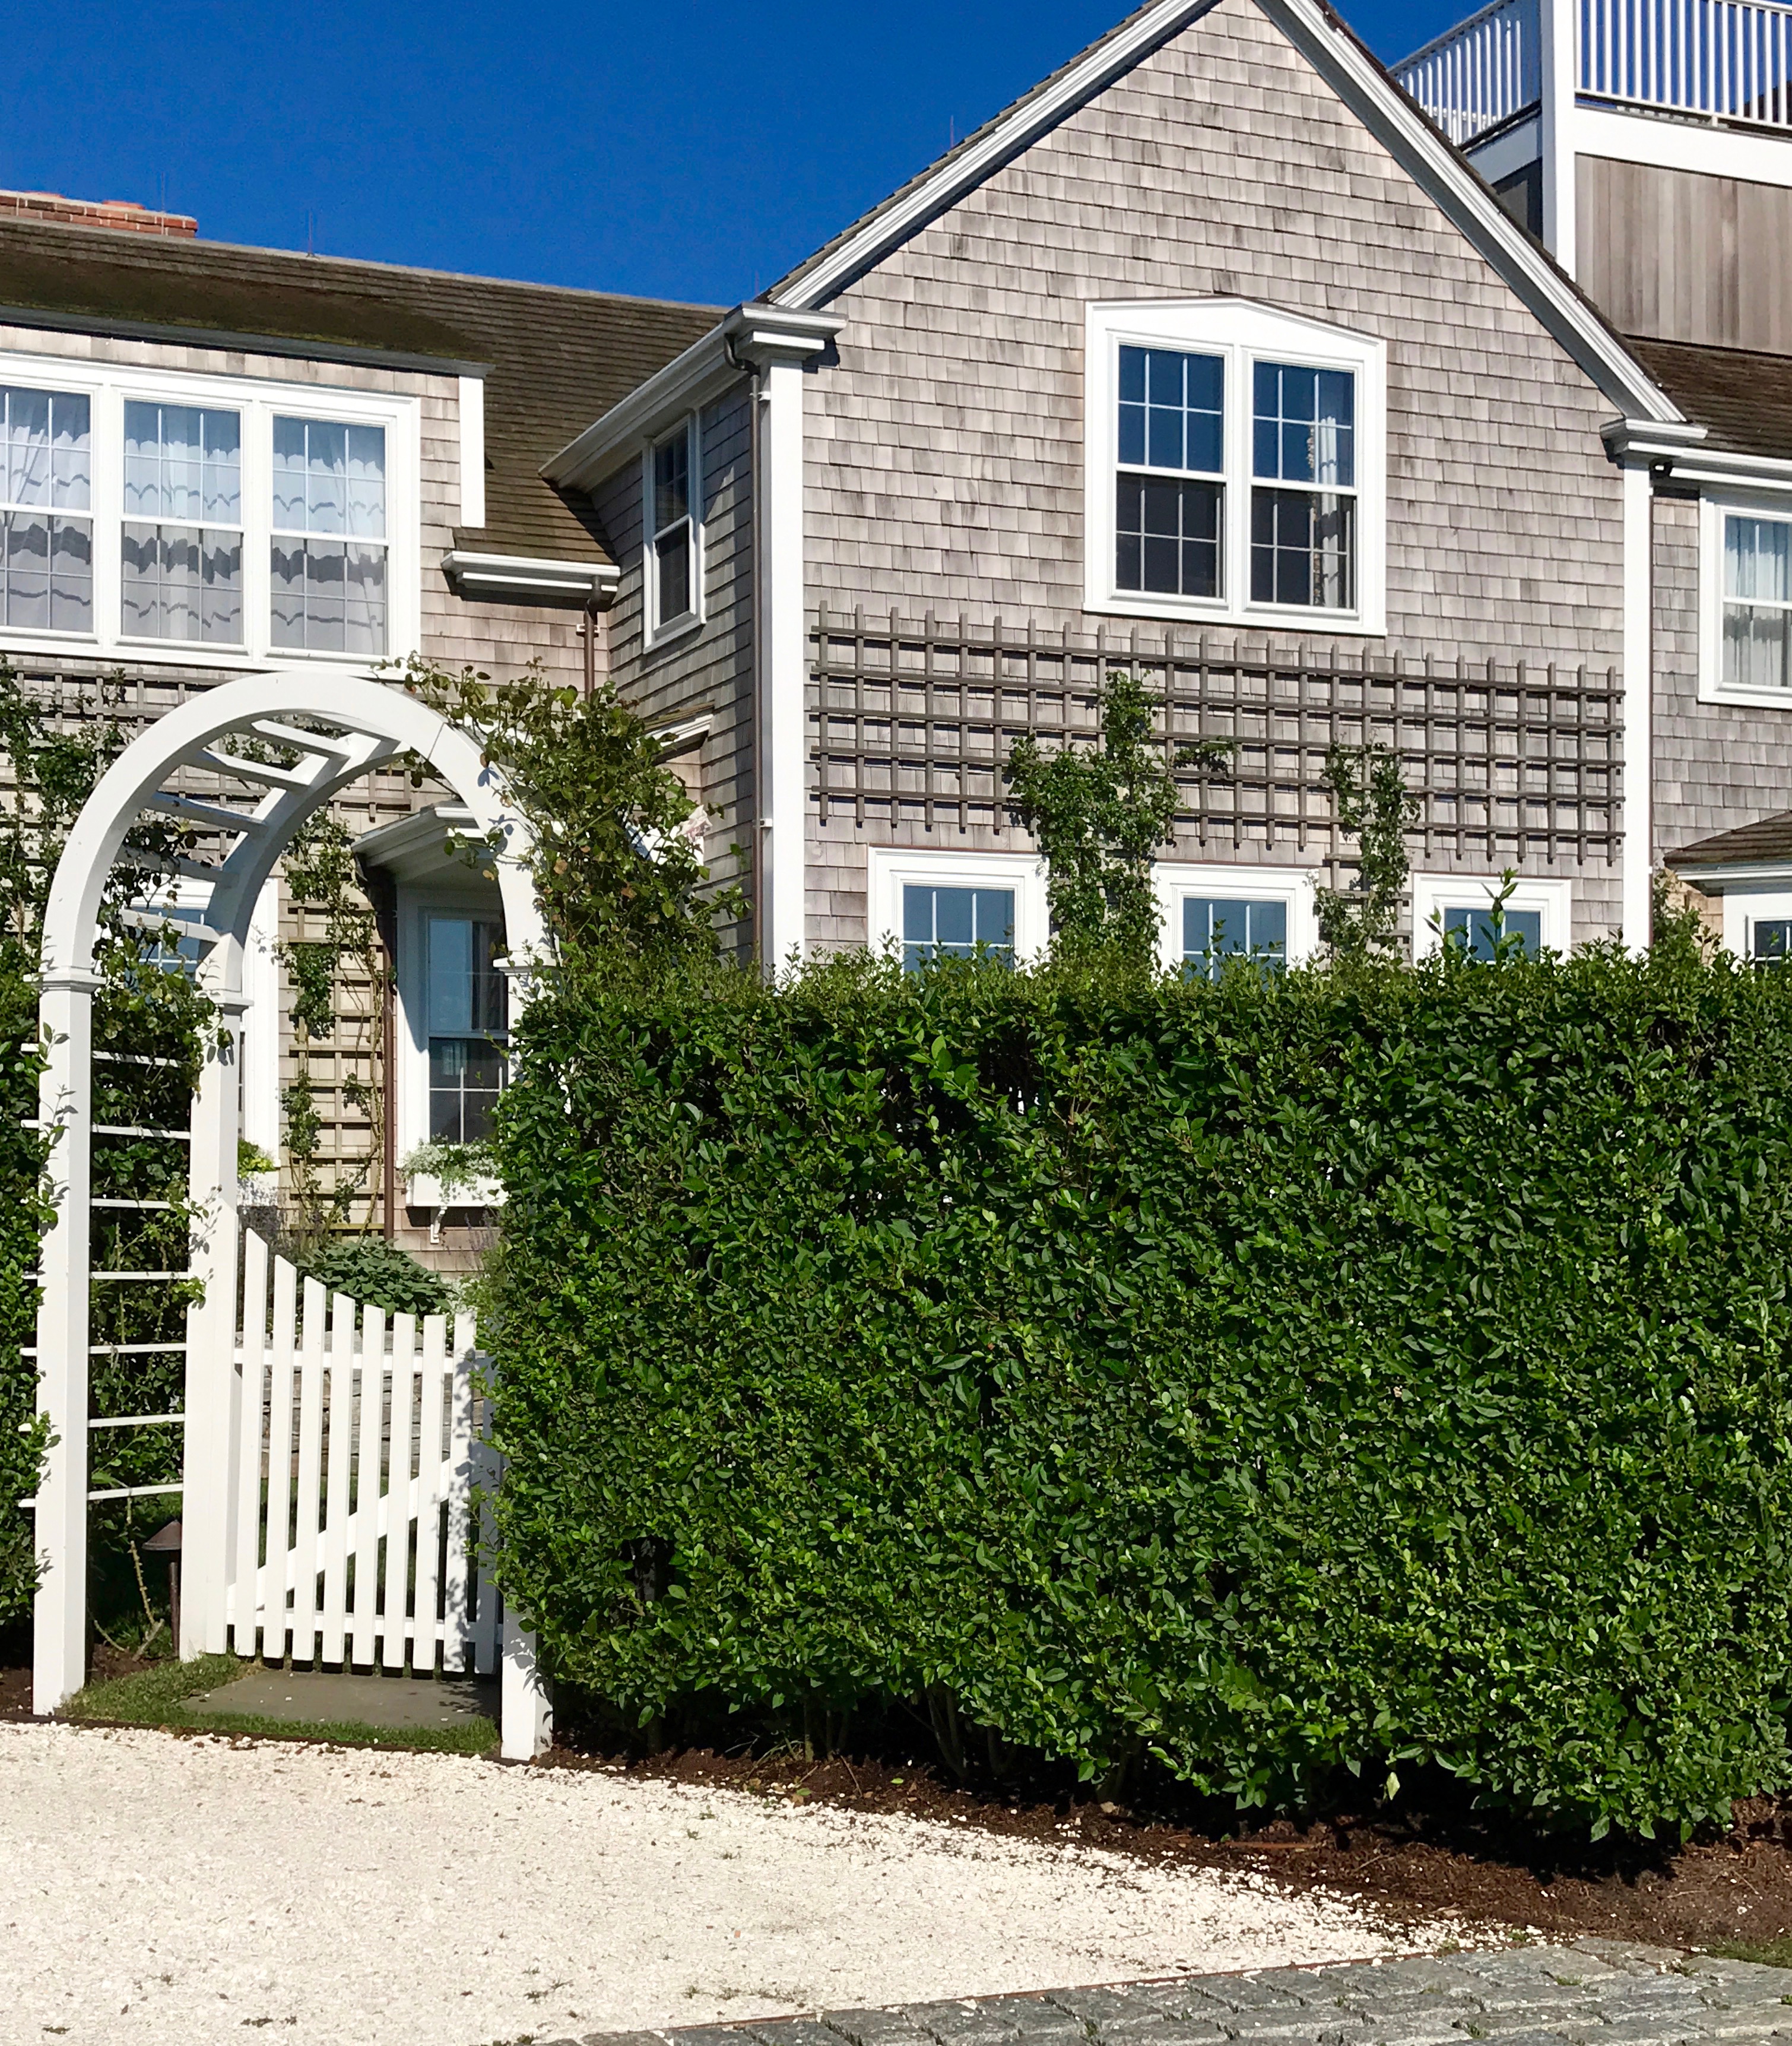 Nantucket home photo by christina dandar for The Potted Boxwood 3